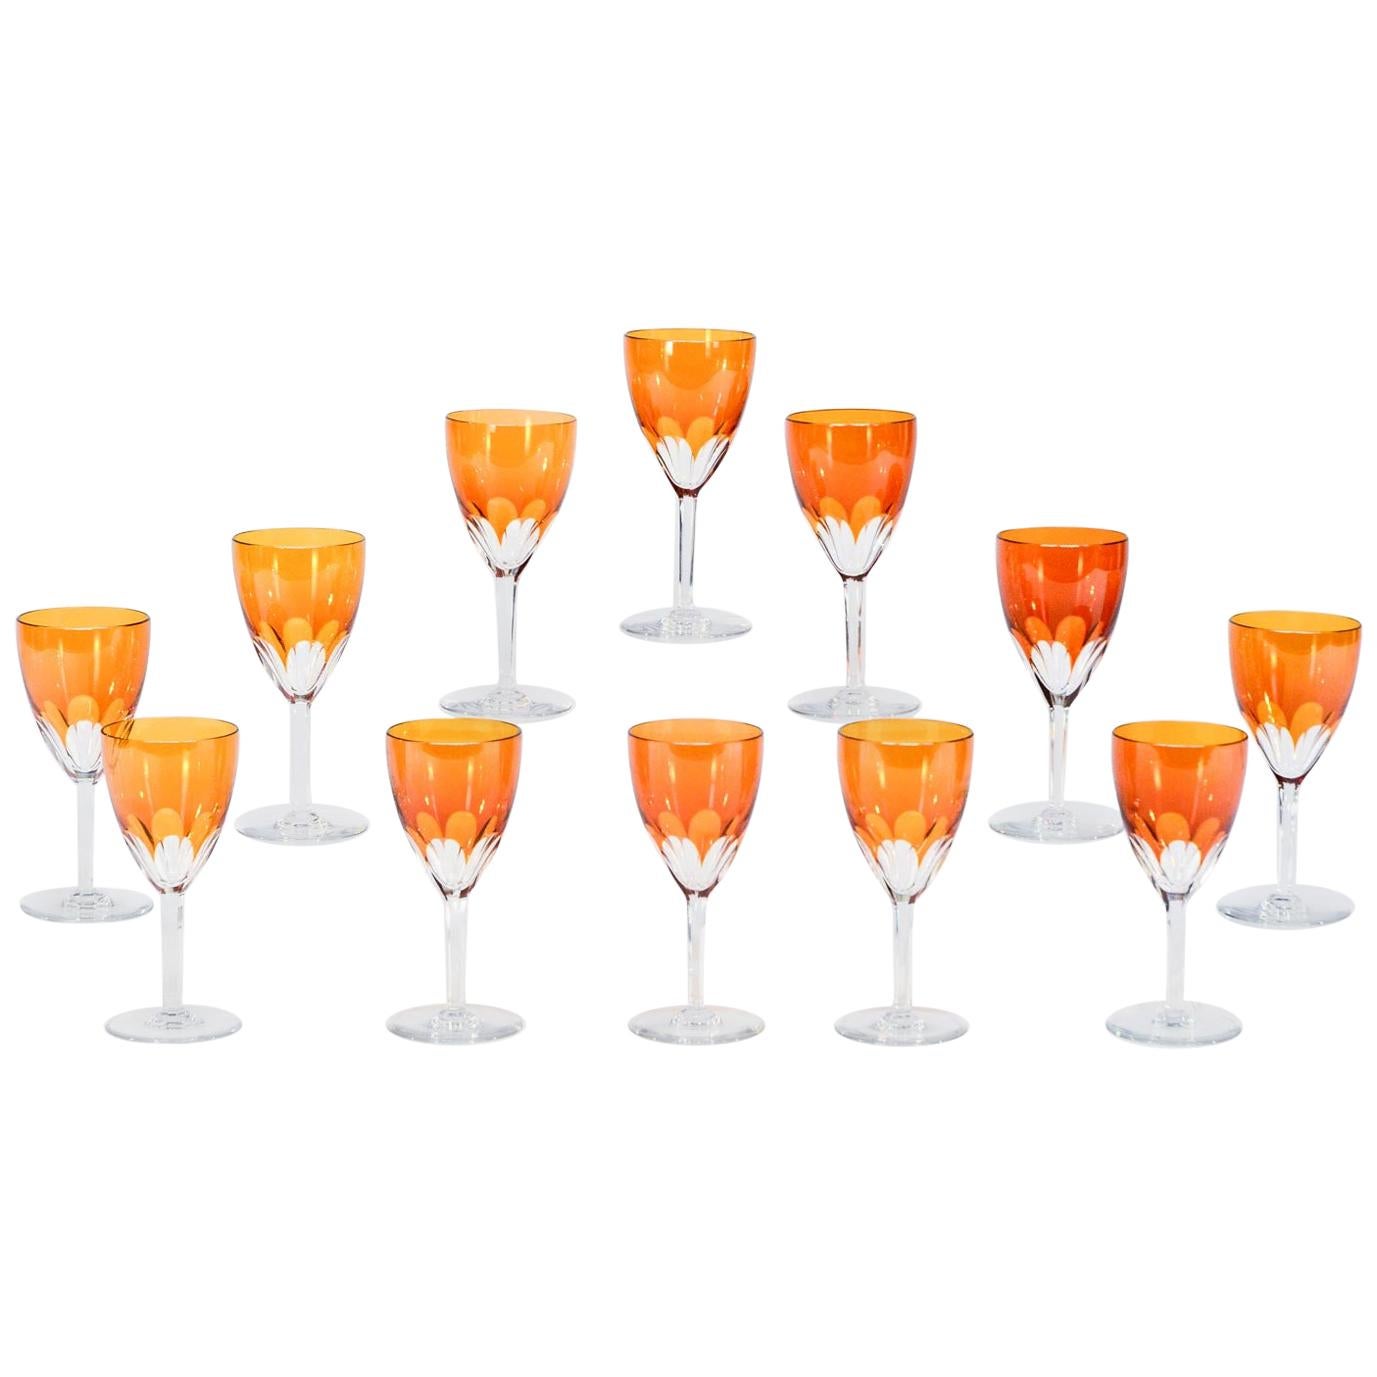 Set of 24-Pieces Signed Baccarat Tangerine Crystal Goblets, 12 Wines & 12 Waters